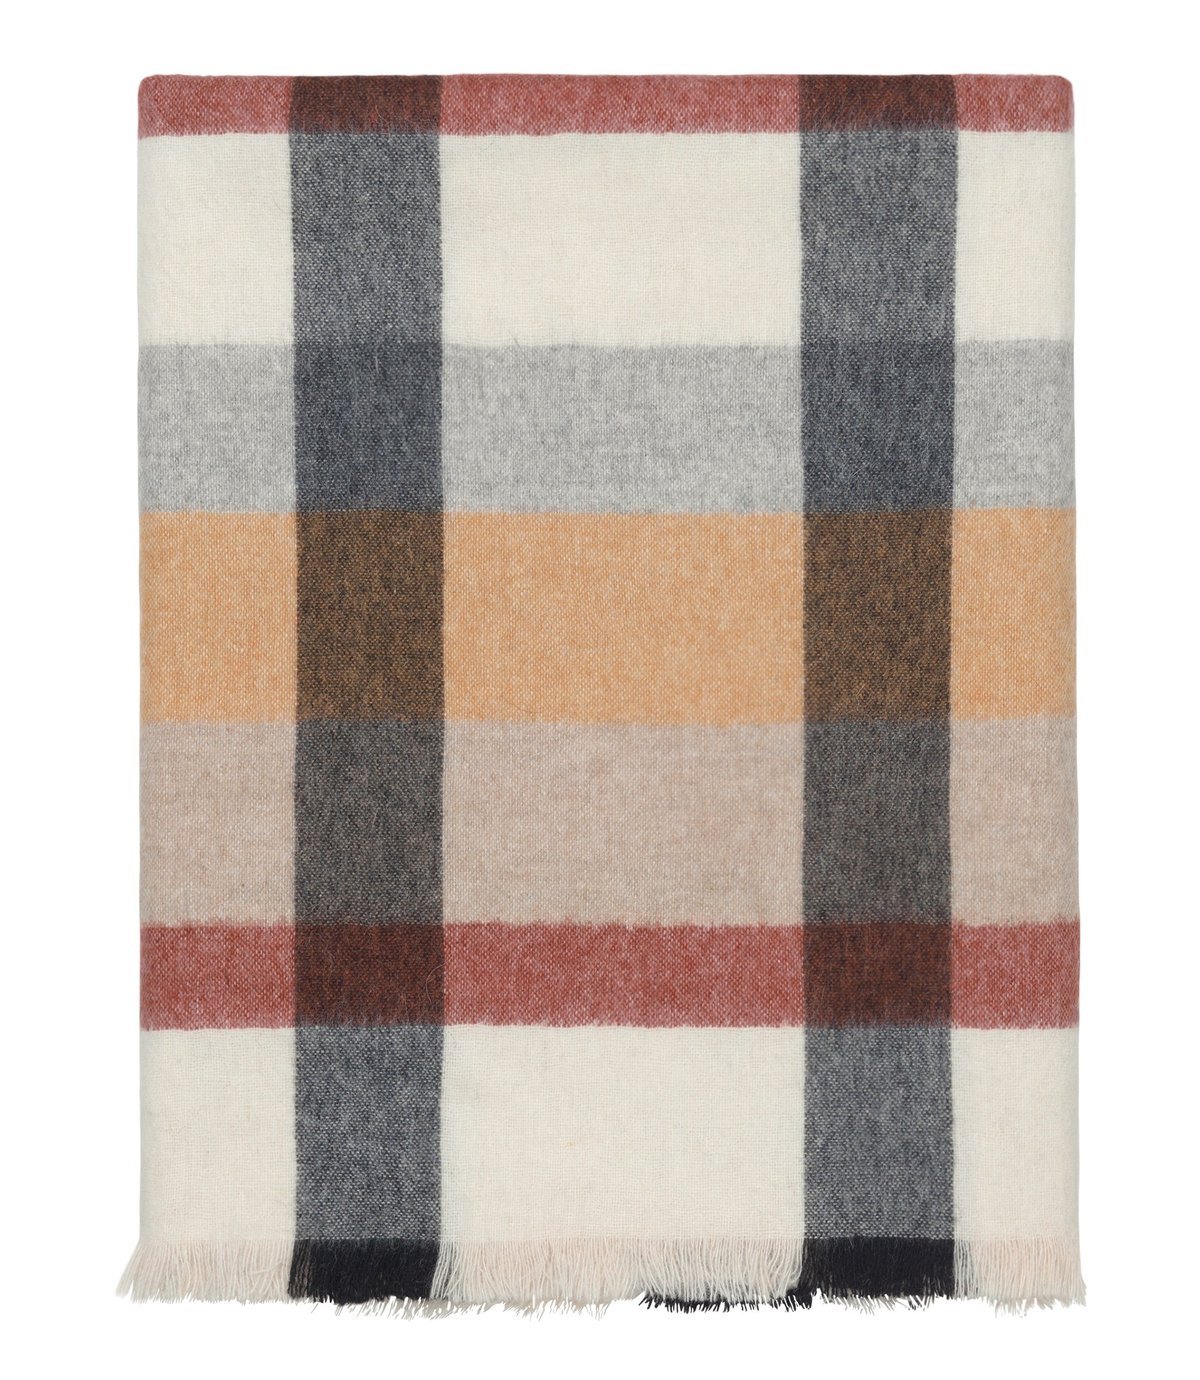 Elvang Denmark Intersection plaid 130x190 cm Rusty red-grey